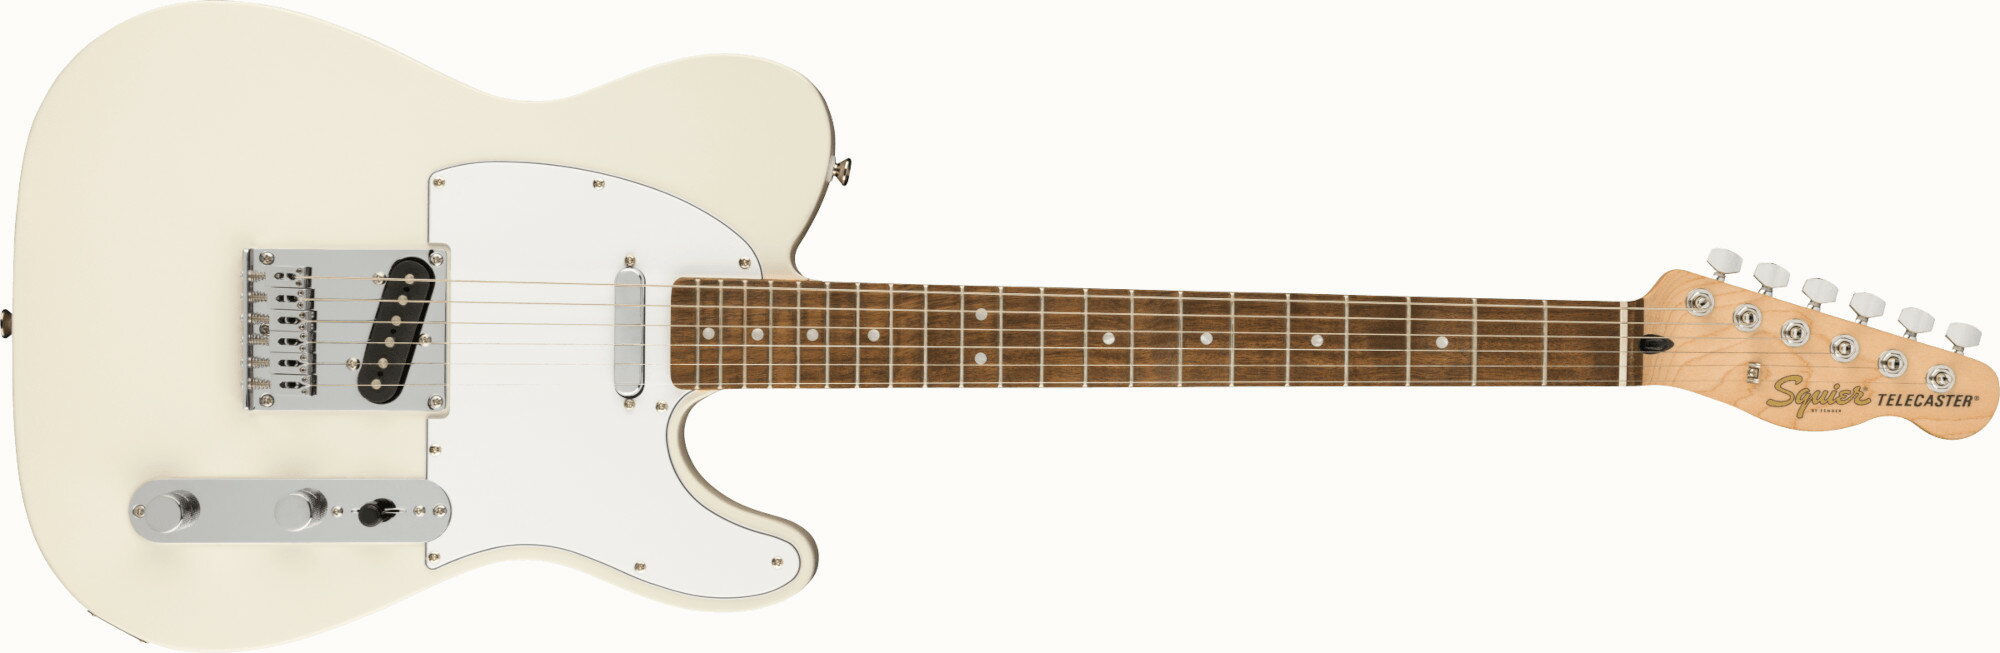 Squier by Fender《スクワイヤー》 Affinity SeriesTelecaster Laurel Fingerboard, White Pickguard Olympic White／オリンピックホワイトテレキャスター